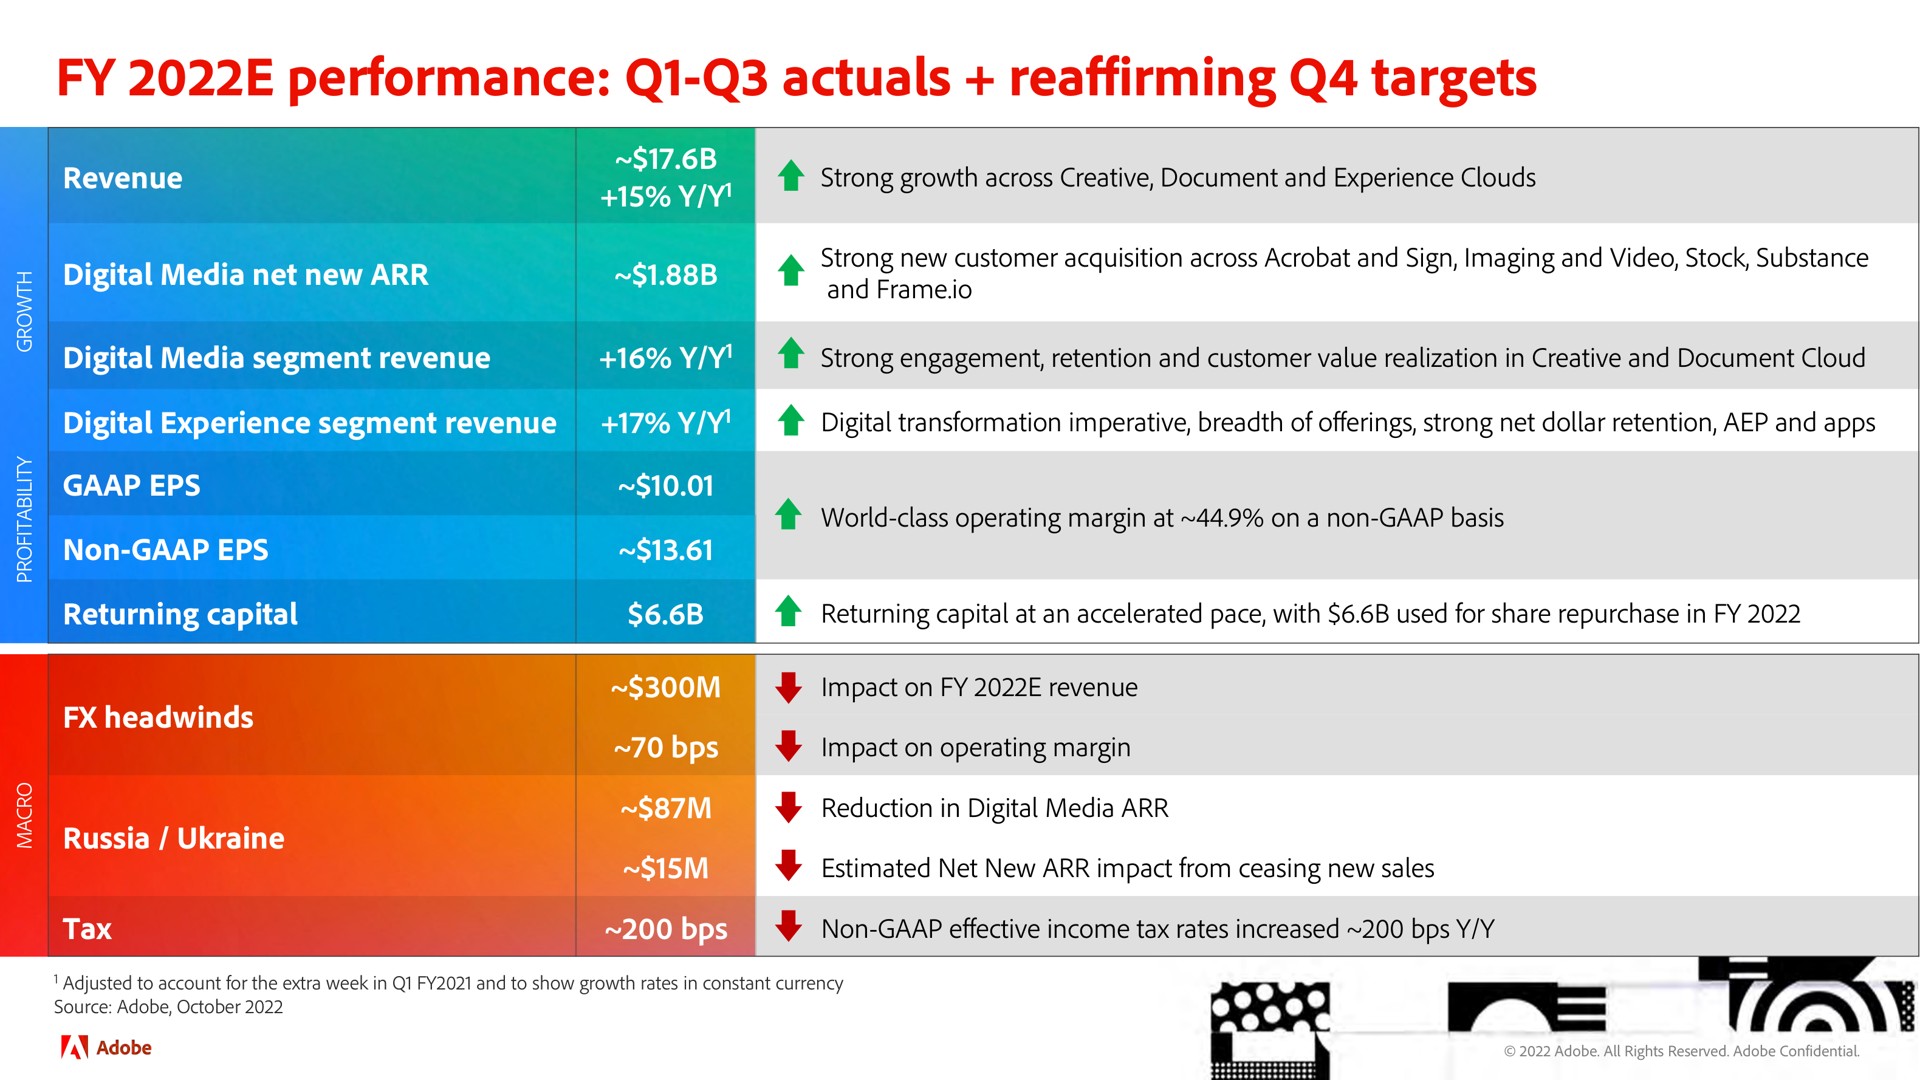 performance reaffirming targets a | Adobe